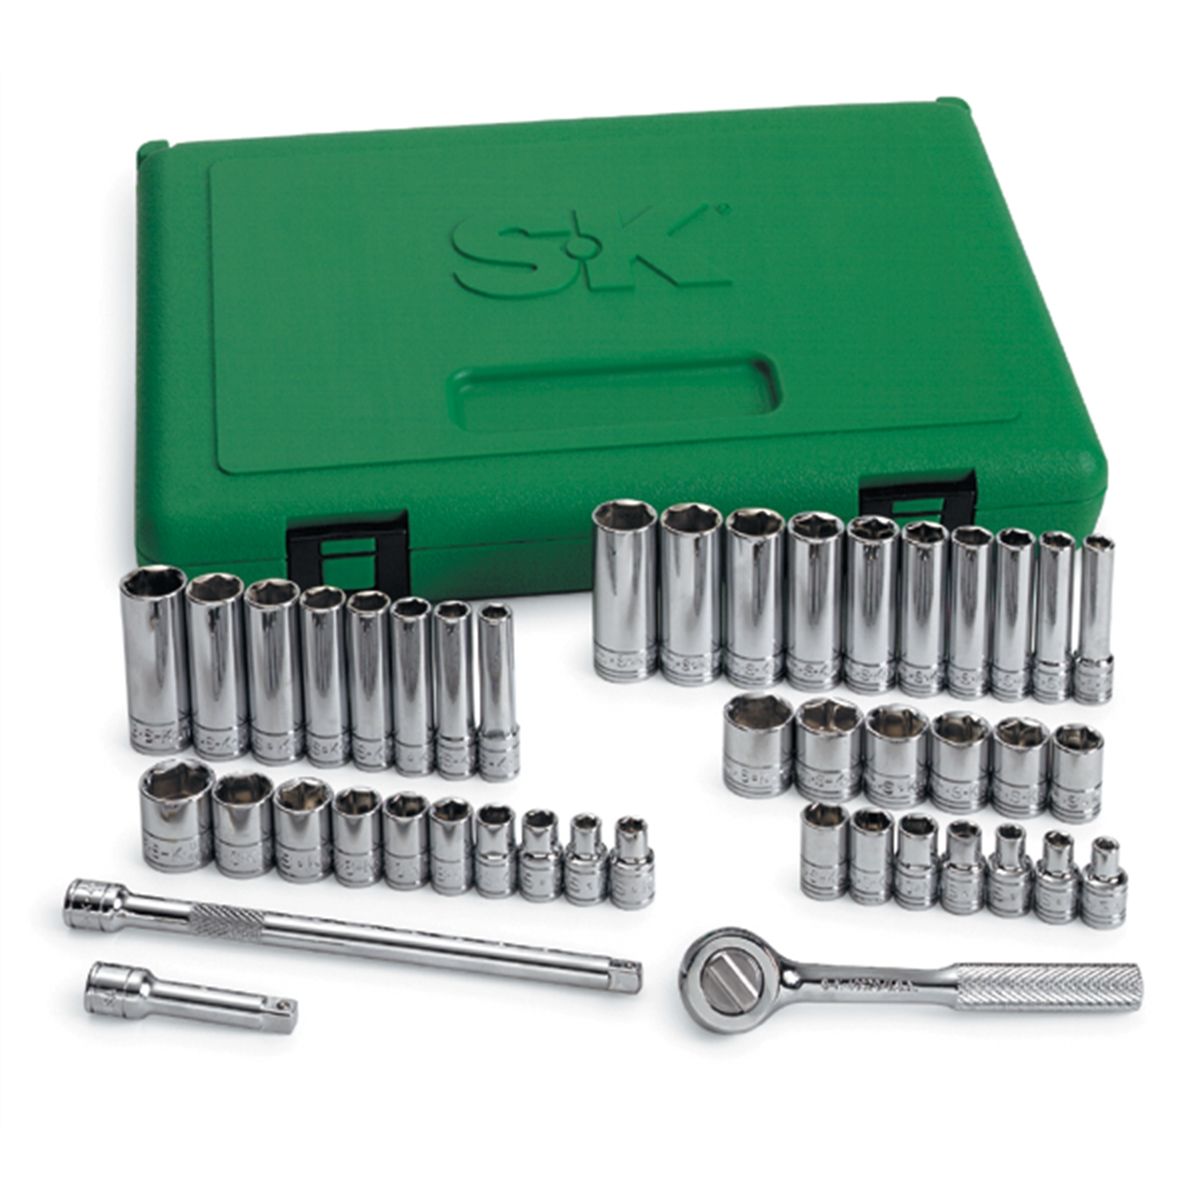 Hi-Spec 44 Piece Metric & SAE Socket Tool Set of 1/4” & 3/8” Drive Sockets with 2 Handles & Adaptors DIY Repair & Fixing at Home The Garage or Workshop Complete in a Sturdy Tray Case 